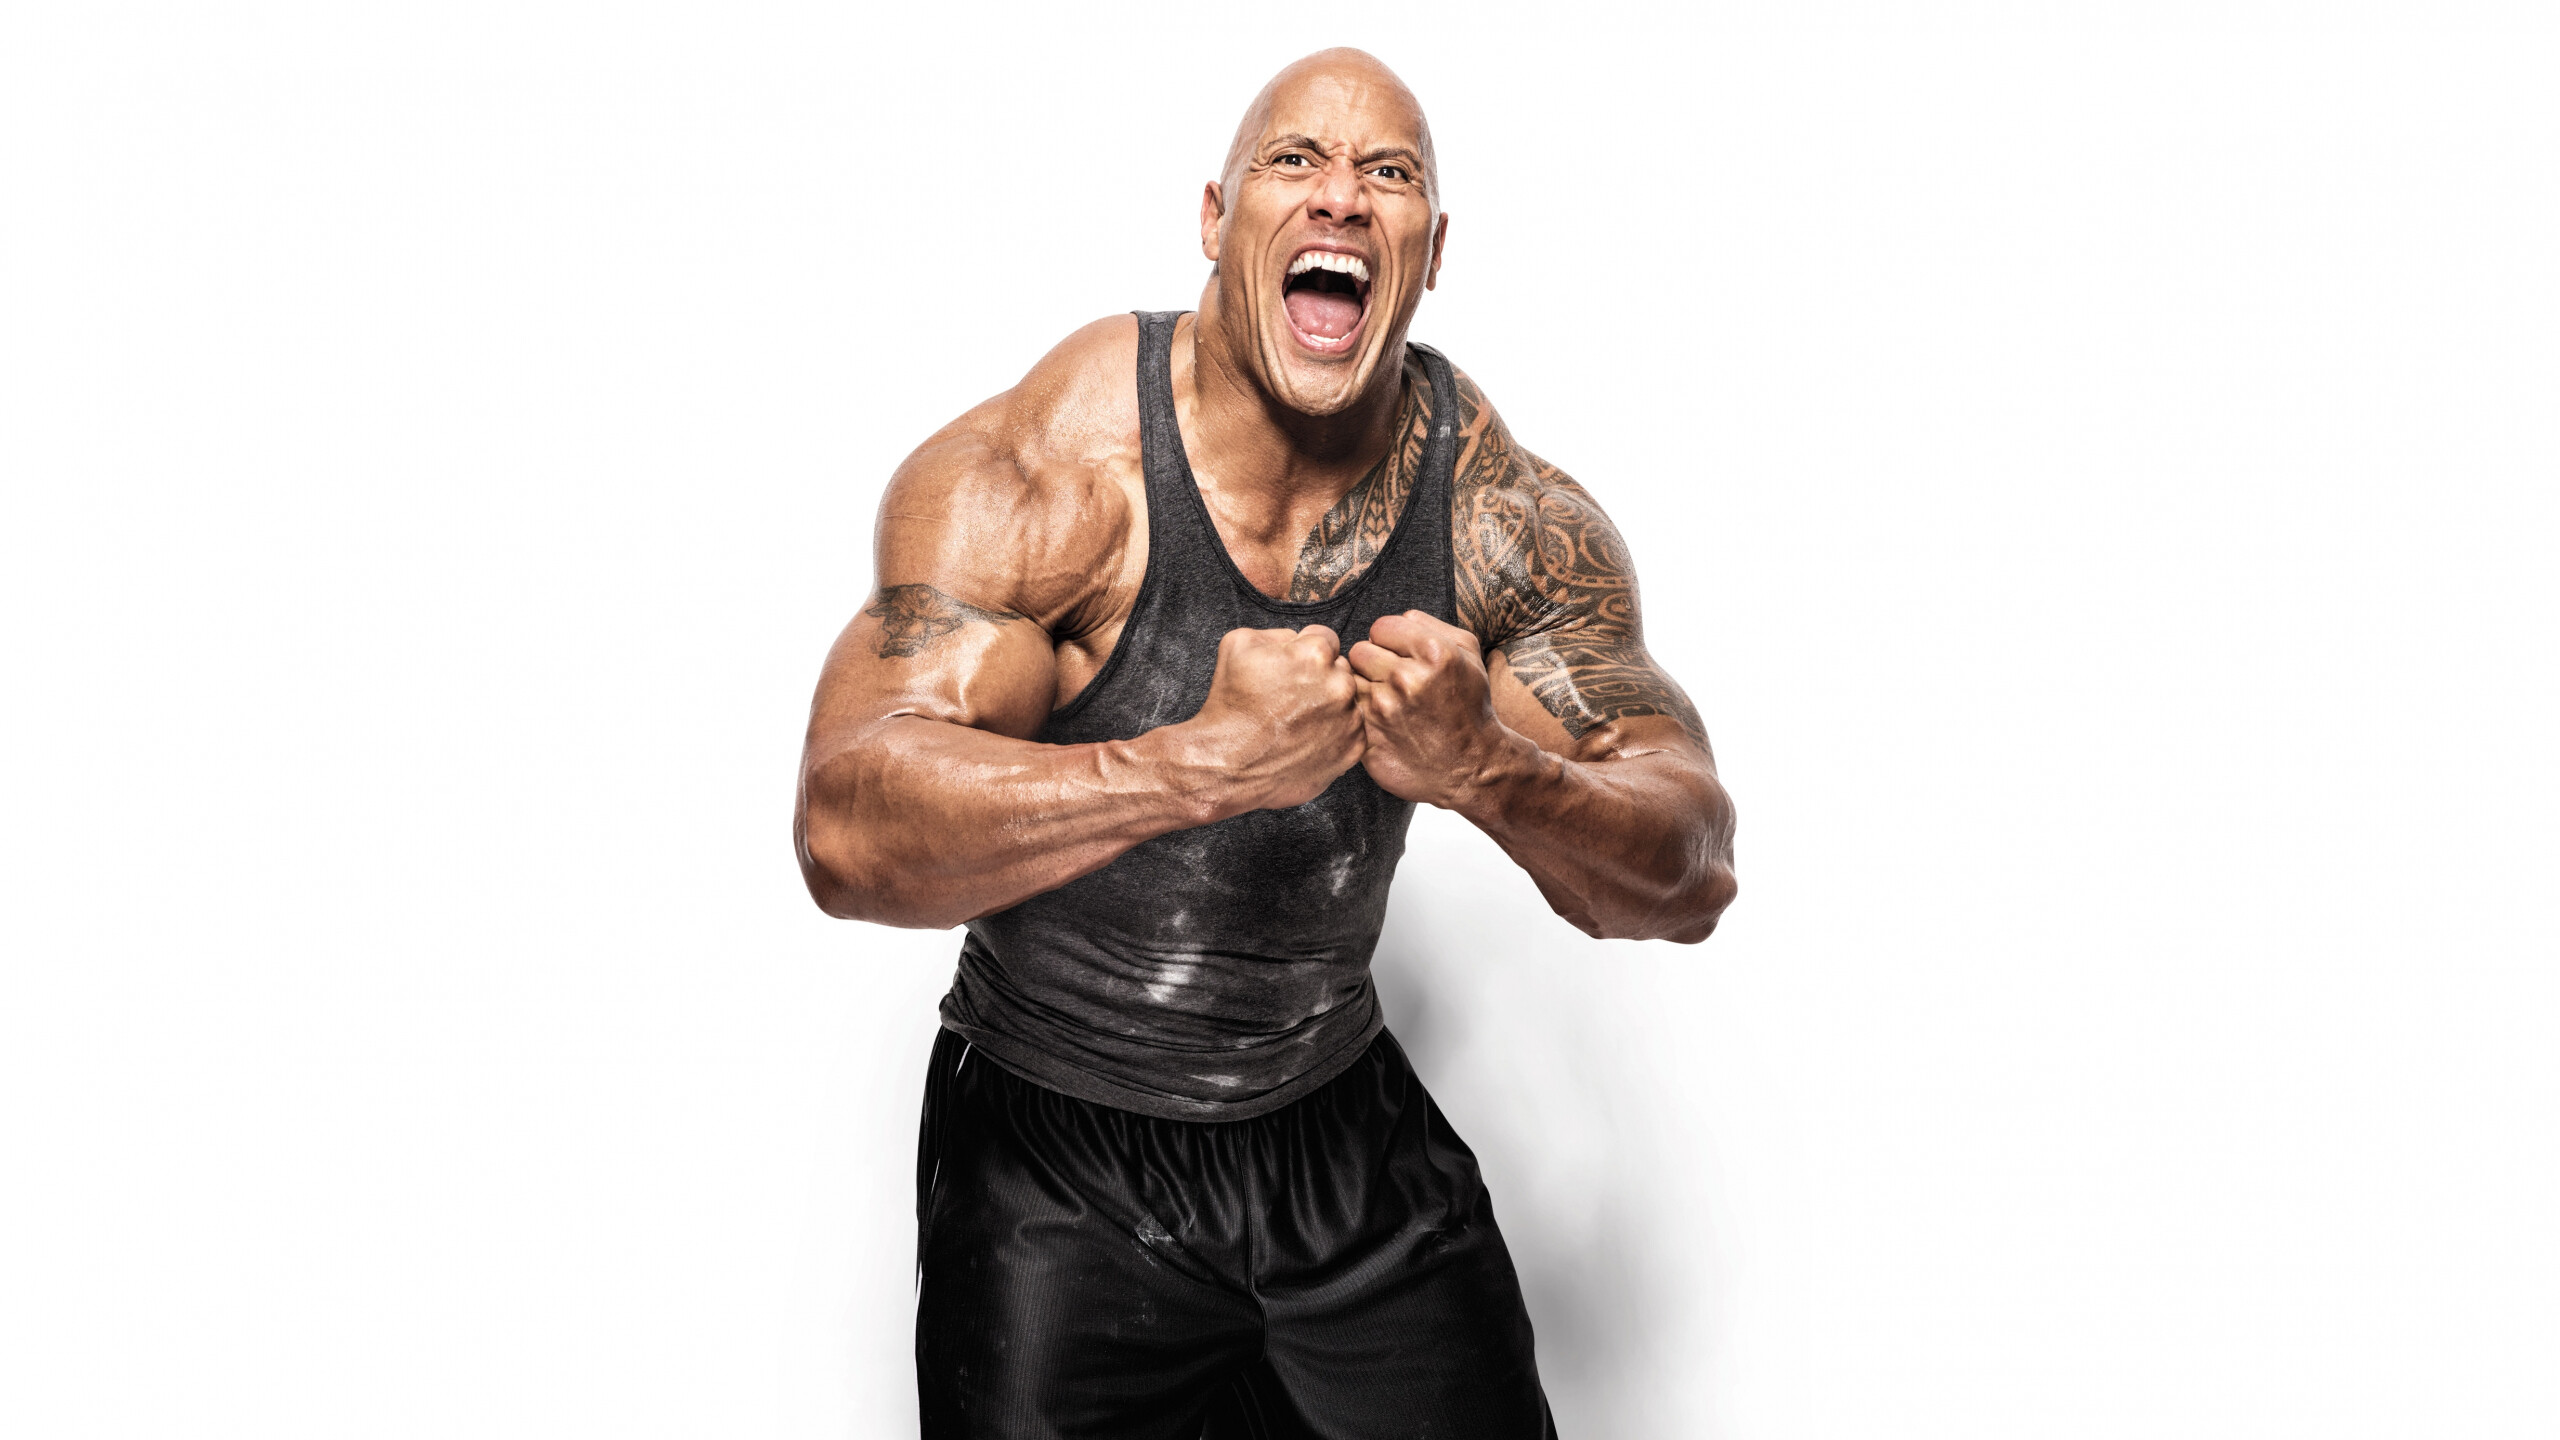 Dwayne Johnson: Released his autobiography, The Rock Says, in 2000, Actor. 2560x1440 HD Wallpaper.